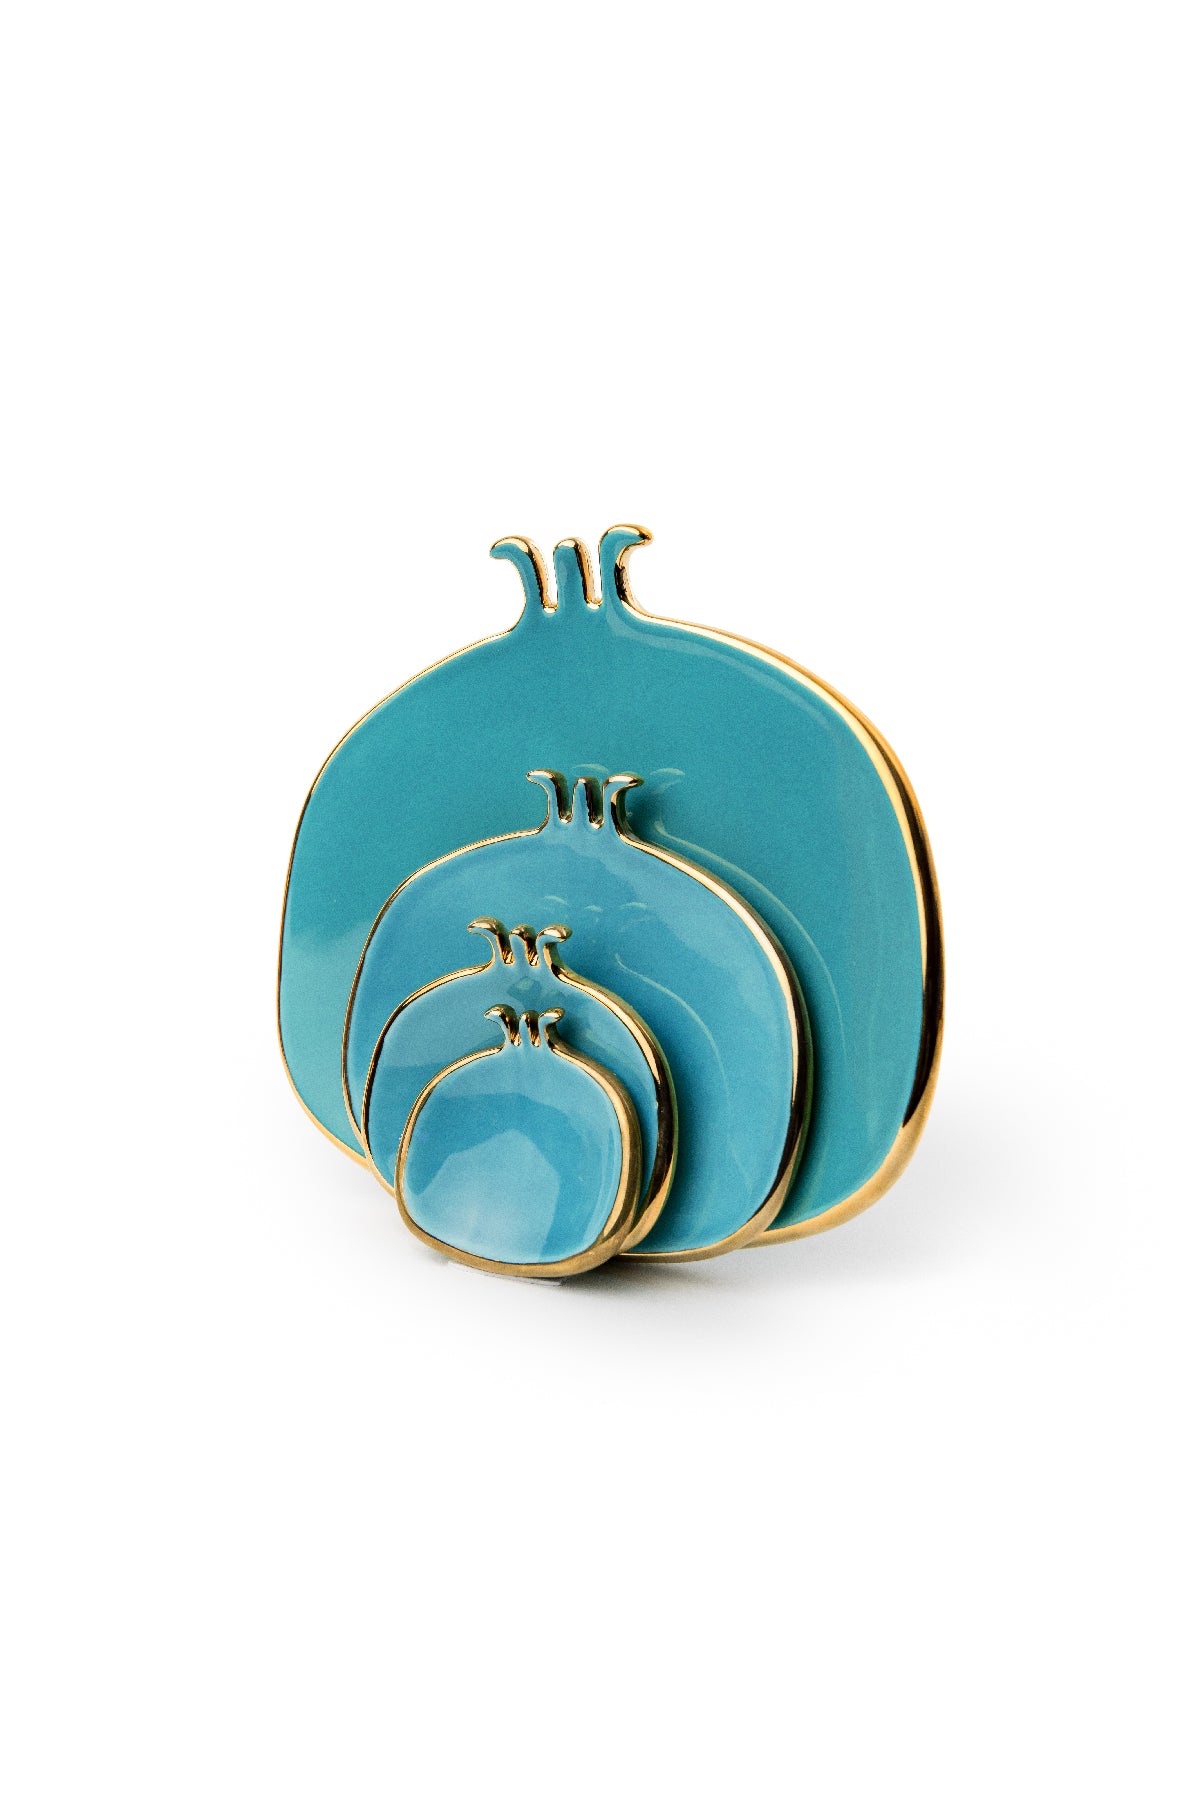 Turquoise Hand Made Ceramic Pomegranate Plates With Gold Edge